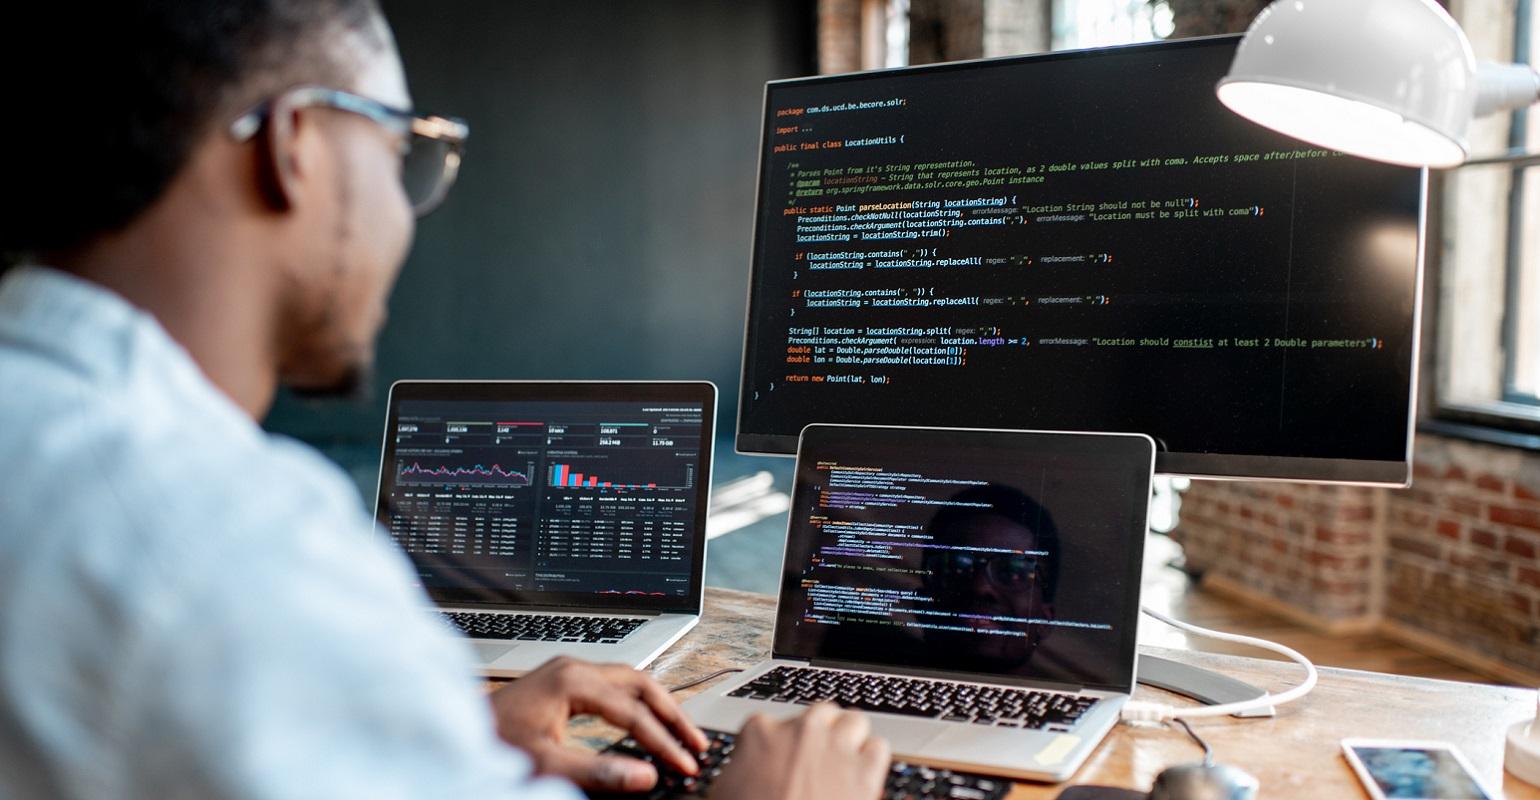 Software Development in 2021: Top 10 Stories of the Year | ITPro Today: IT News, How-Tos, Trends, Case Studies, Career Tips, More